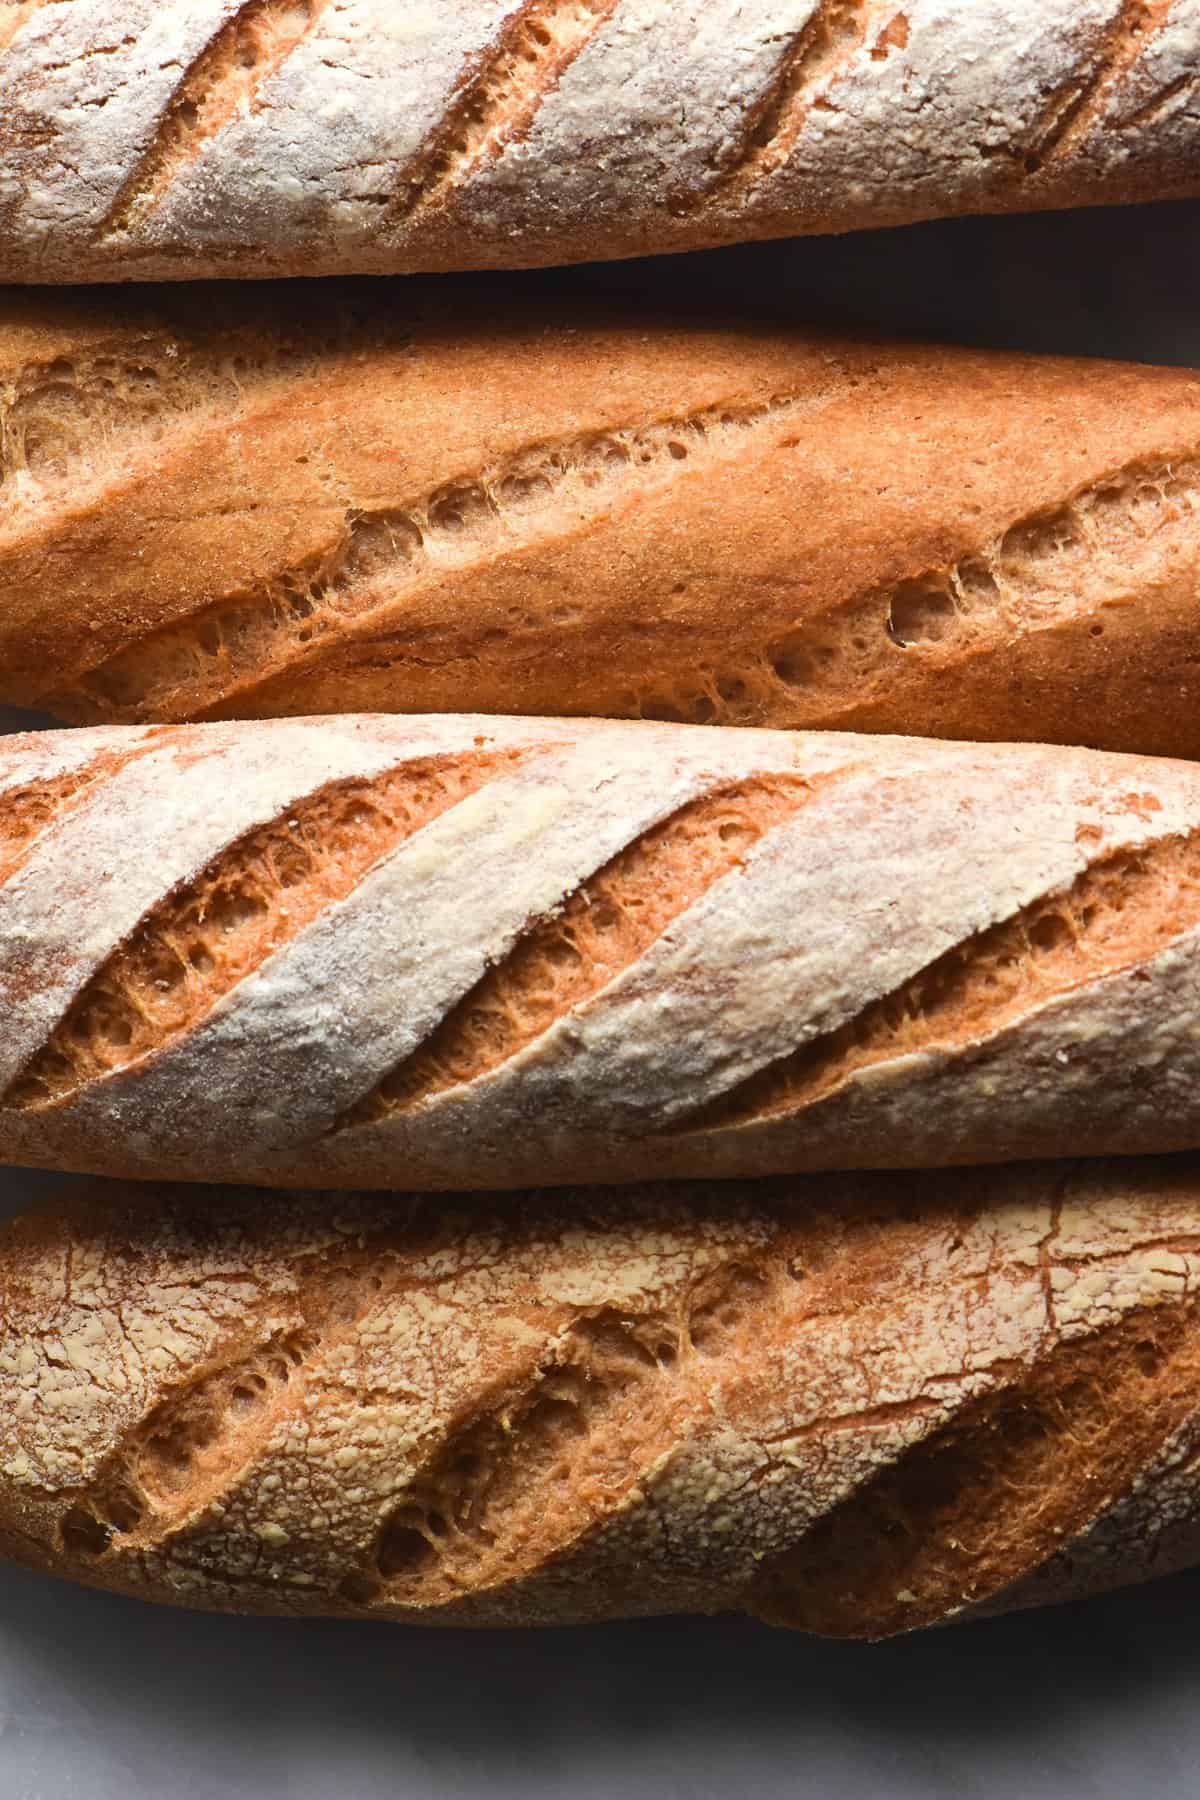 A close up aerial view of four gluten free baguettes. The baguettes line the image horizontally so the viewer can see a close up of the crust of each baguette.